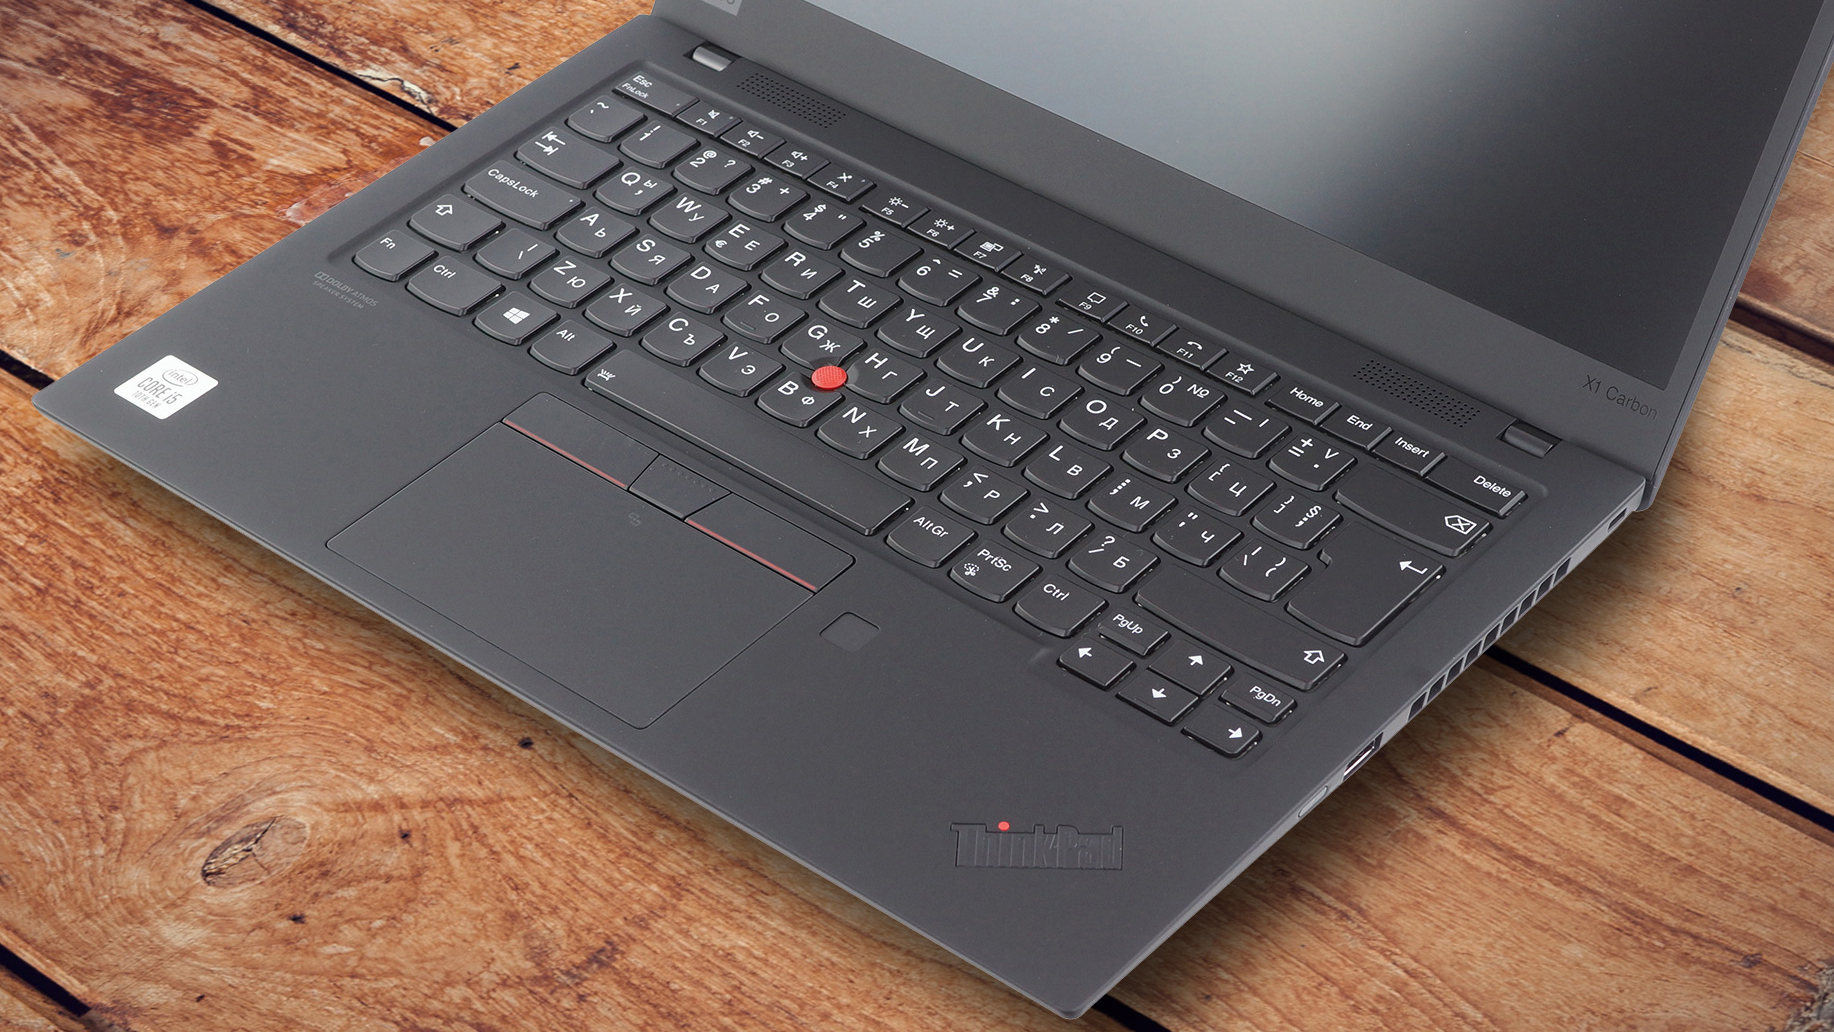 Lenovo ThinkPad X1 Carbon (8th Gen, 2020) - Specs, Tests, and